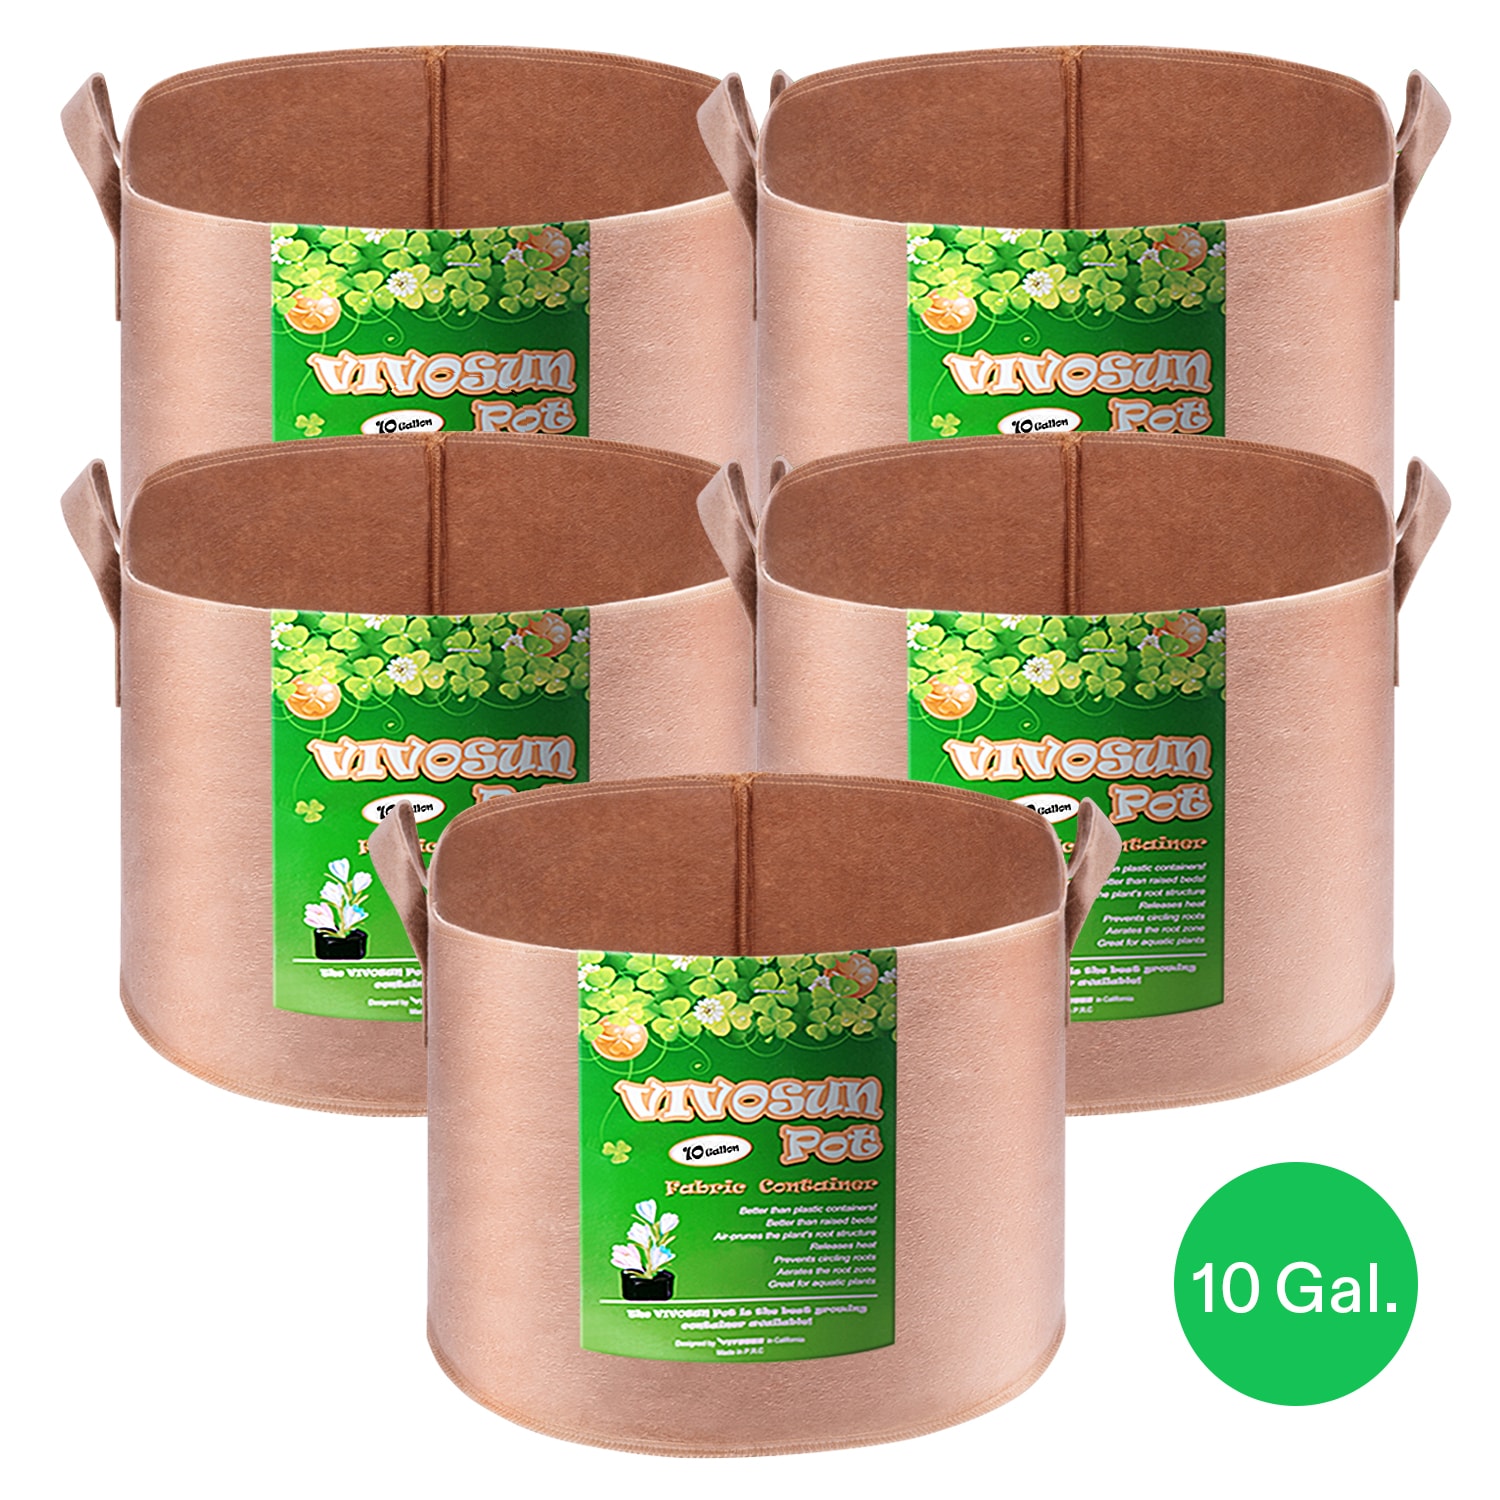 T4U Fabric Plant Grow Bags With Handles 10 Gallon